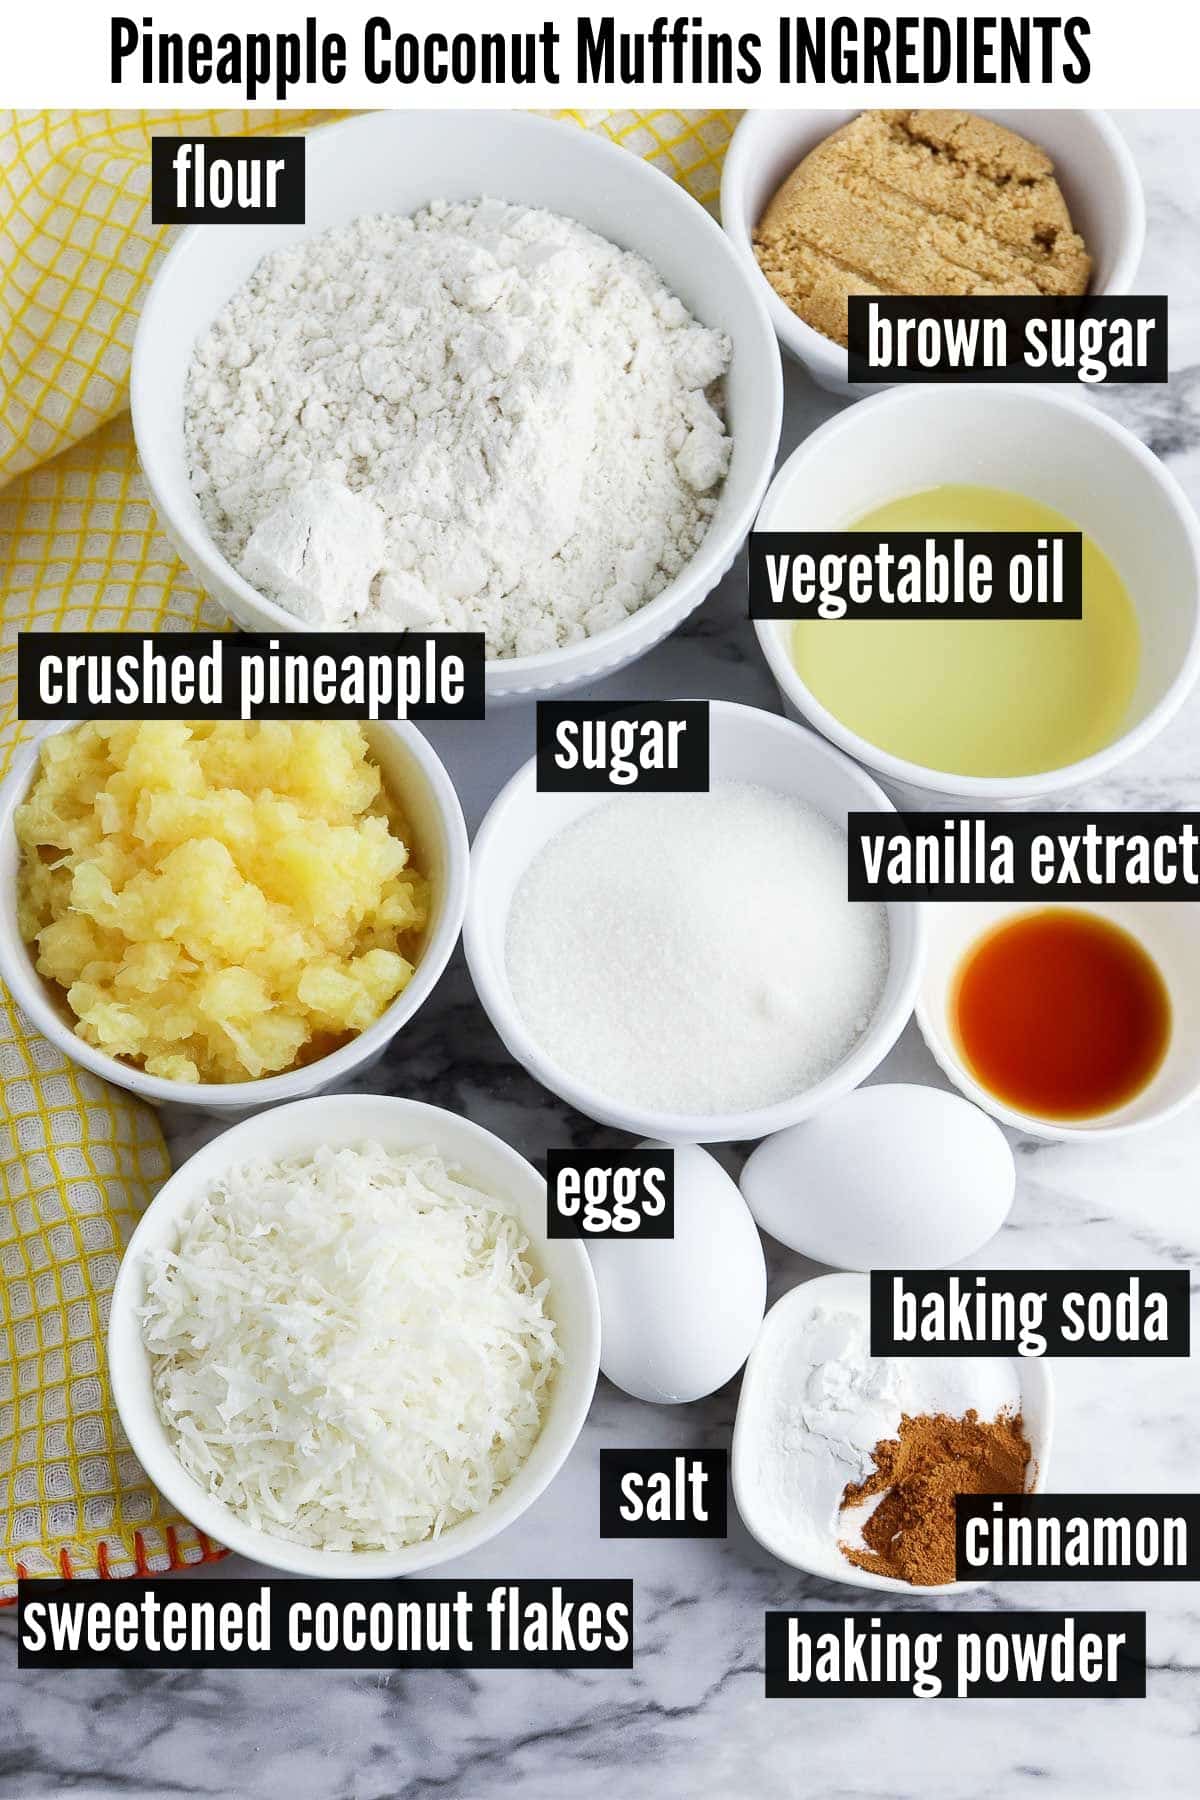 pineapple coconut muffins labelled ingredients.